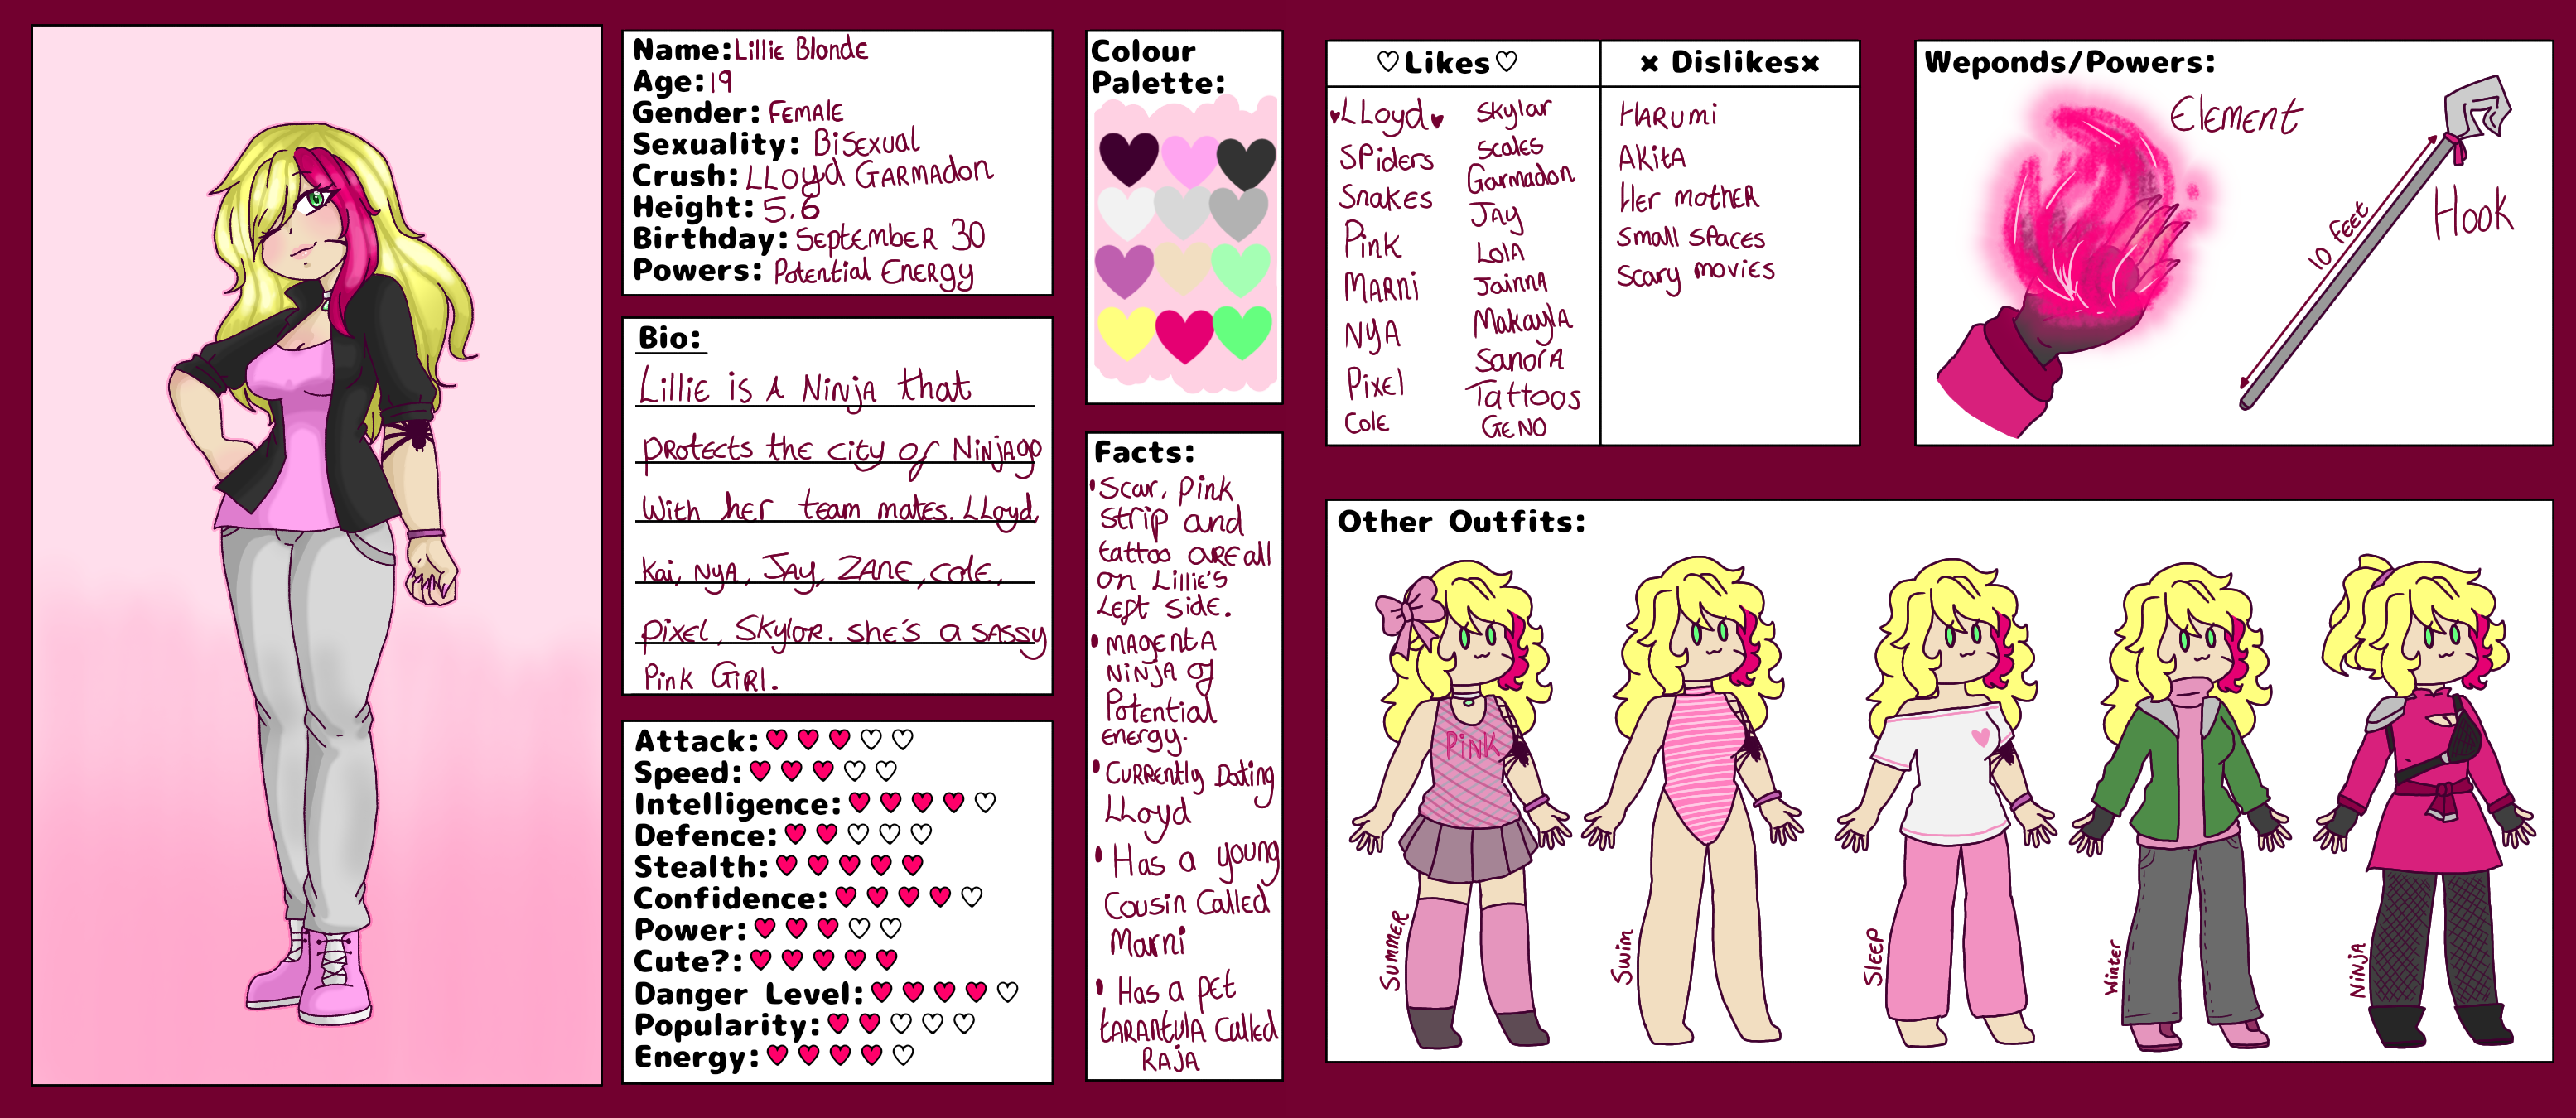 Lillie blonde reference sheet by Poppet-Seed on DeviantArt